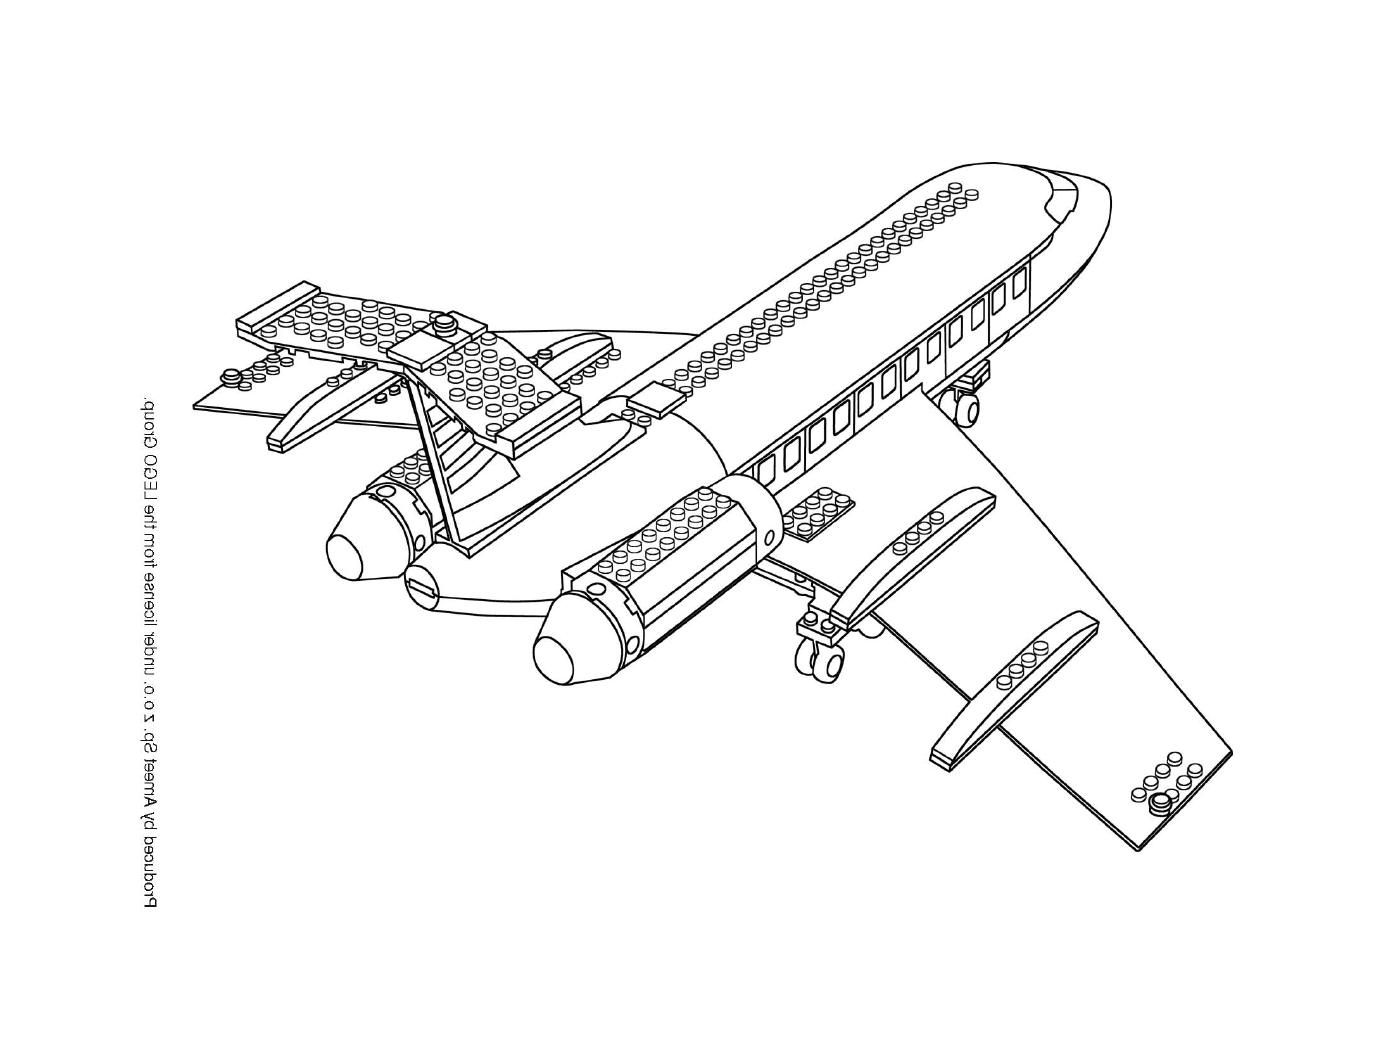  A drawing plane 